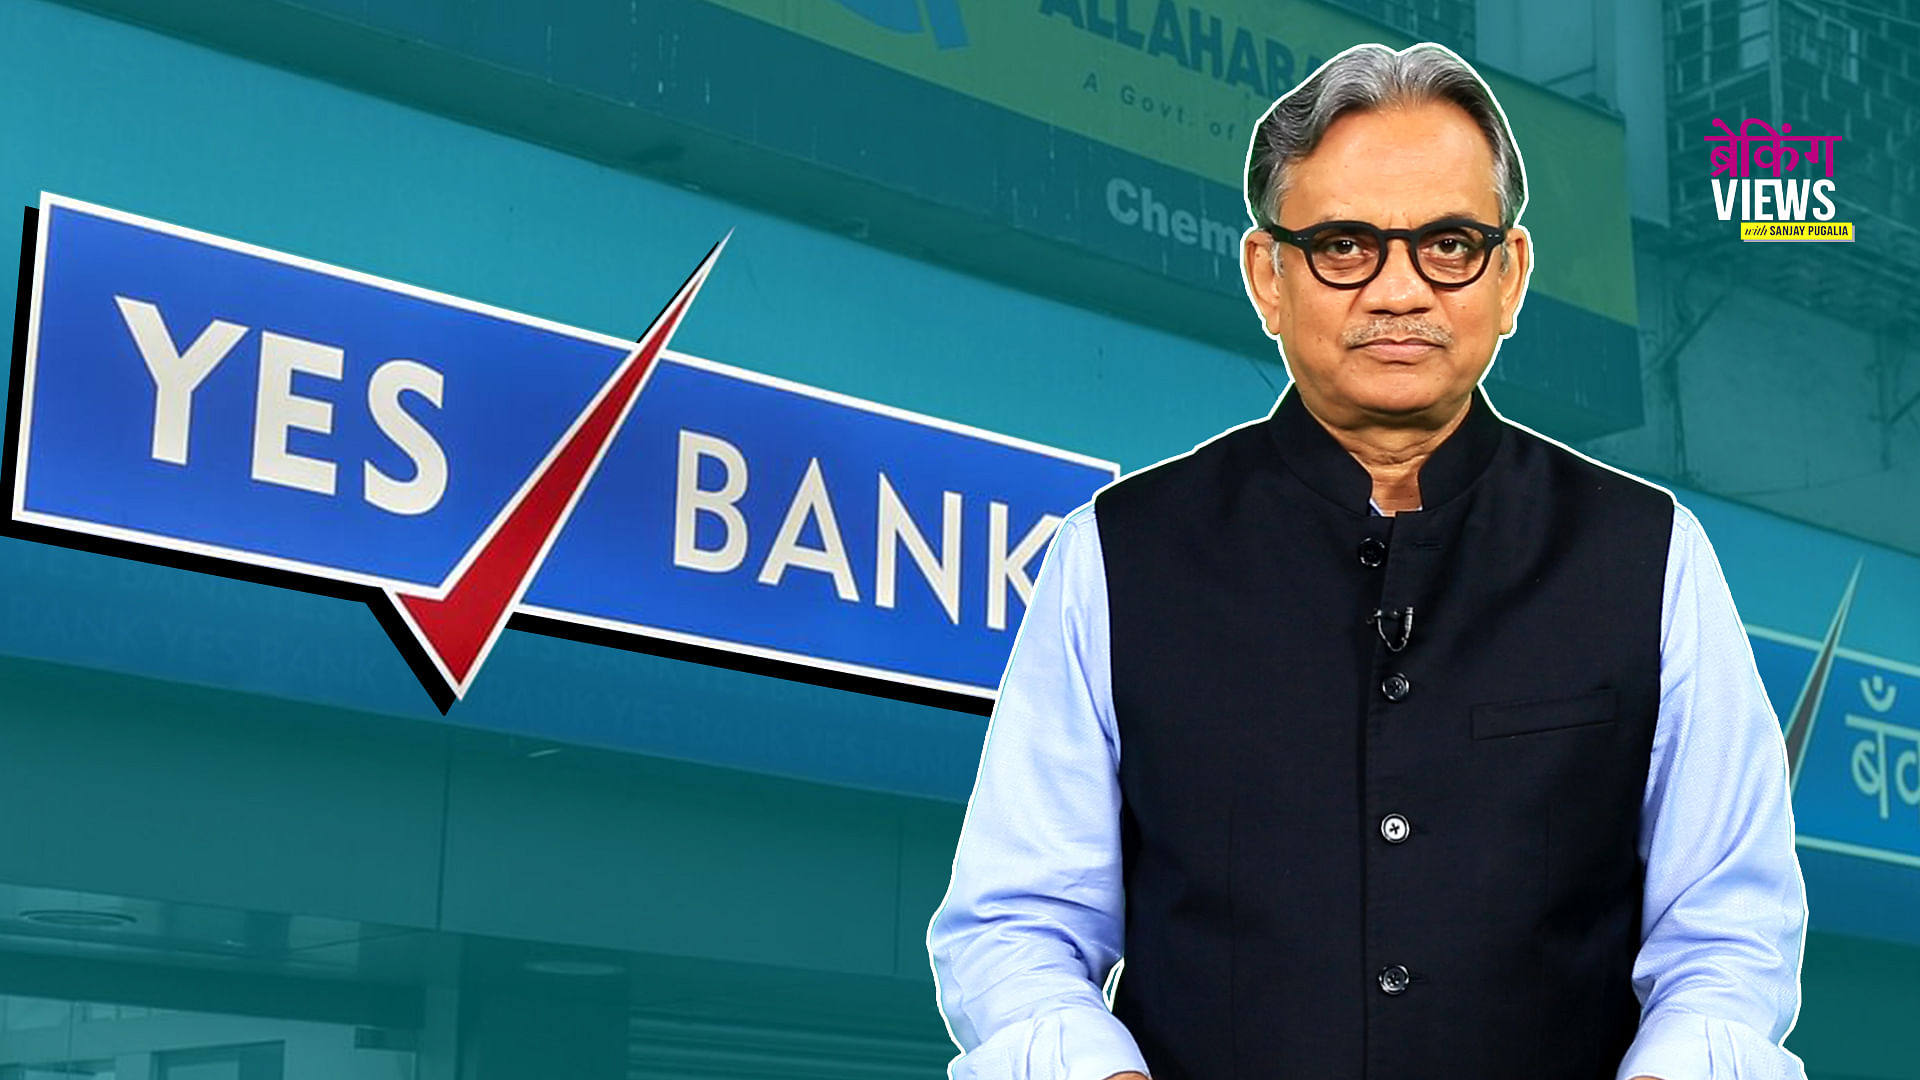 The Quint’s Editorial Director Sanjay Pugalia decodes the YES Bank crisis.